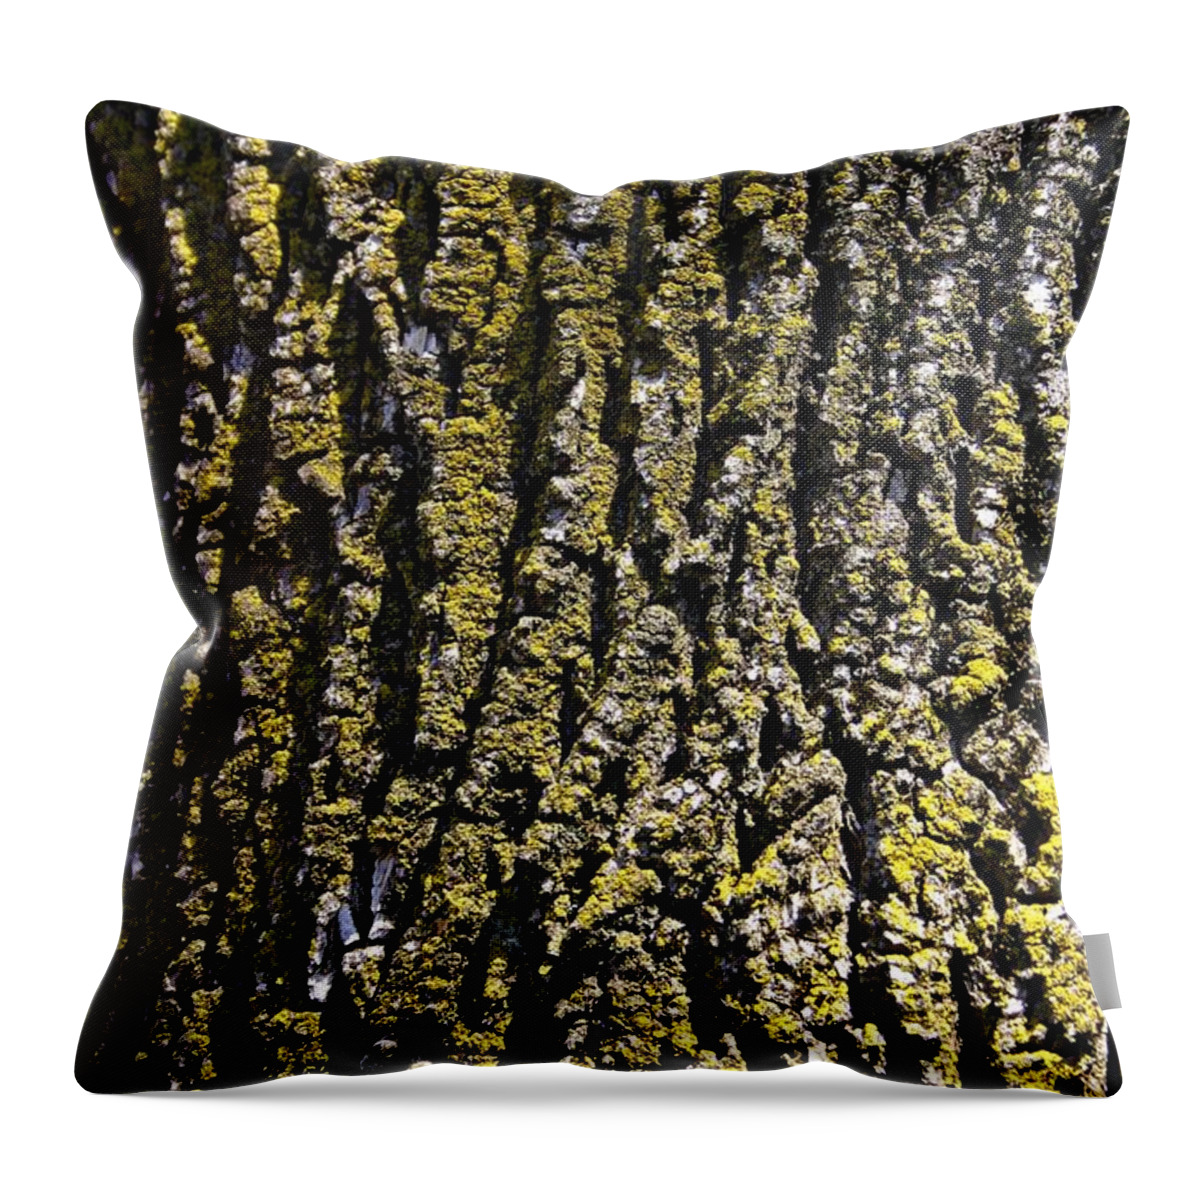 Tree Throw Pillow featuring the photograph Bark 2 by Henry Kowalski